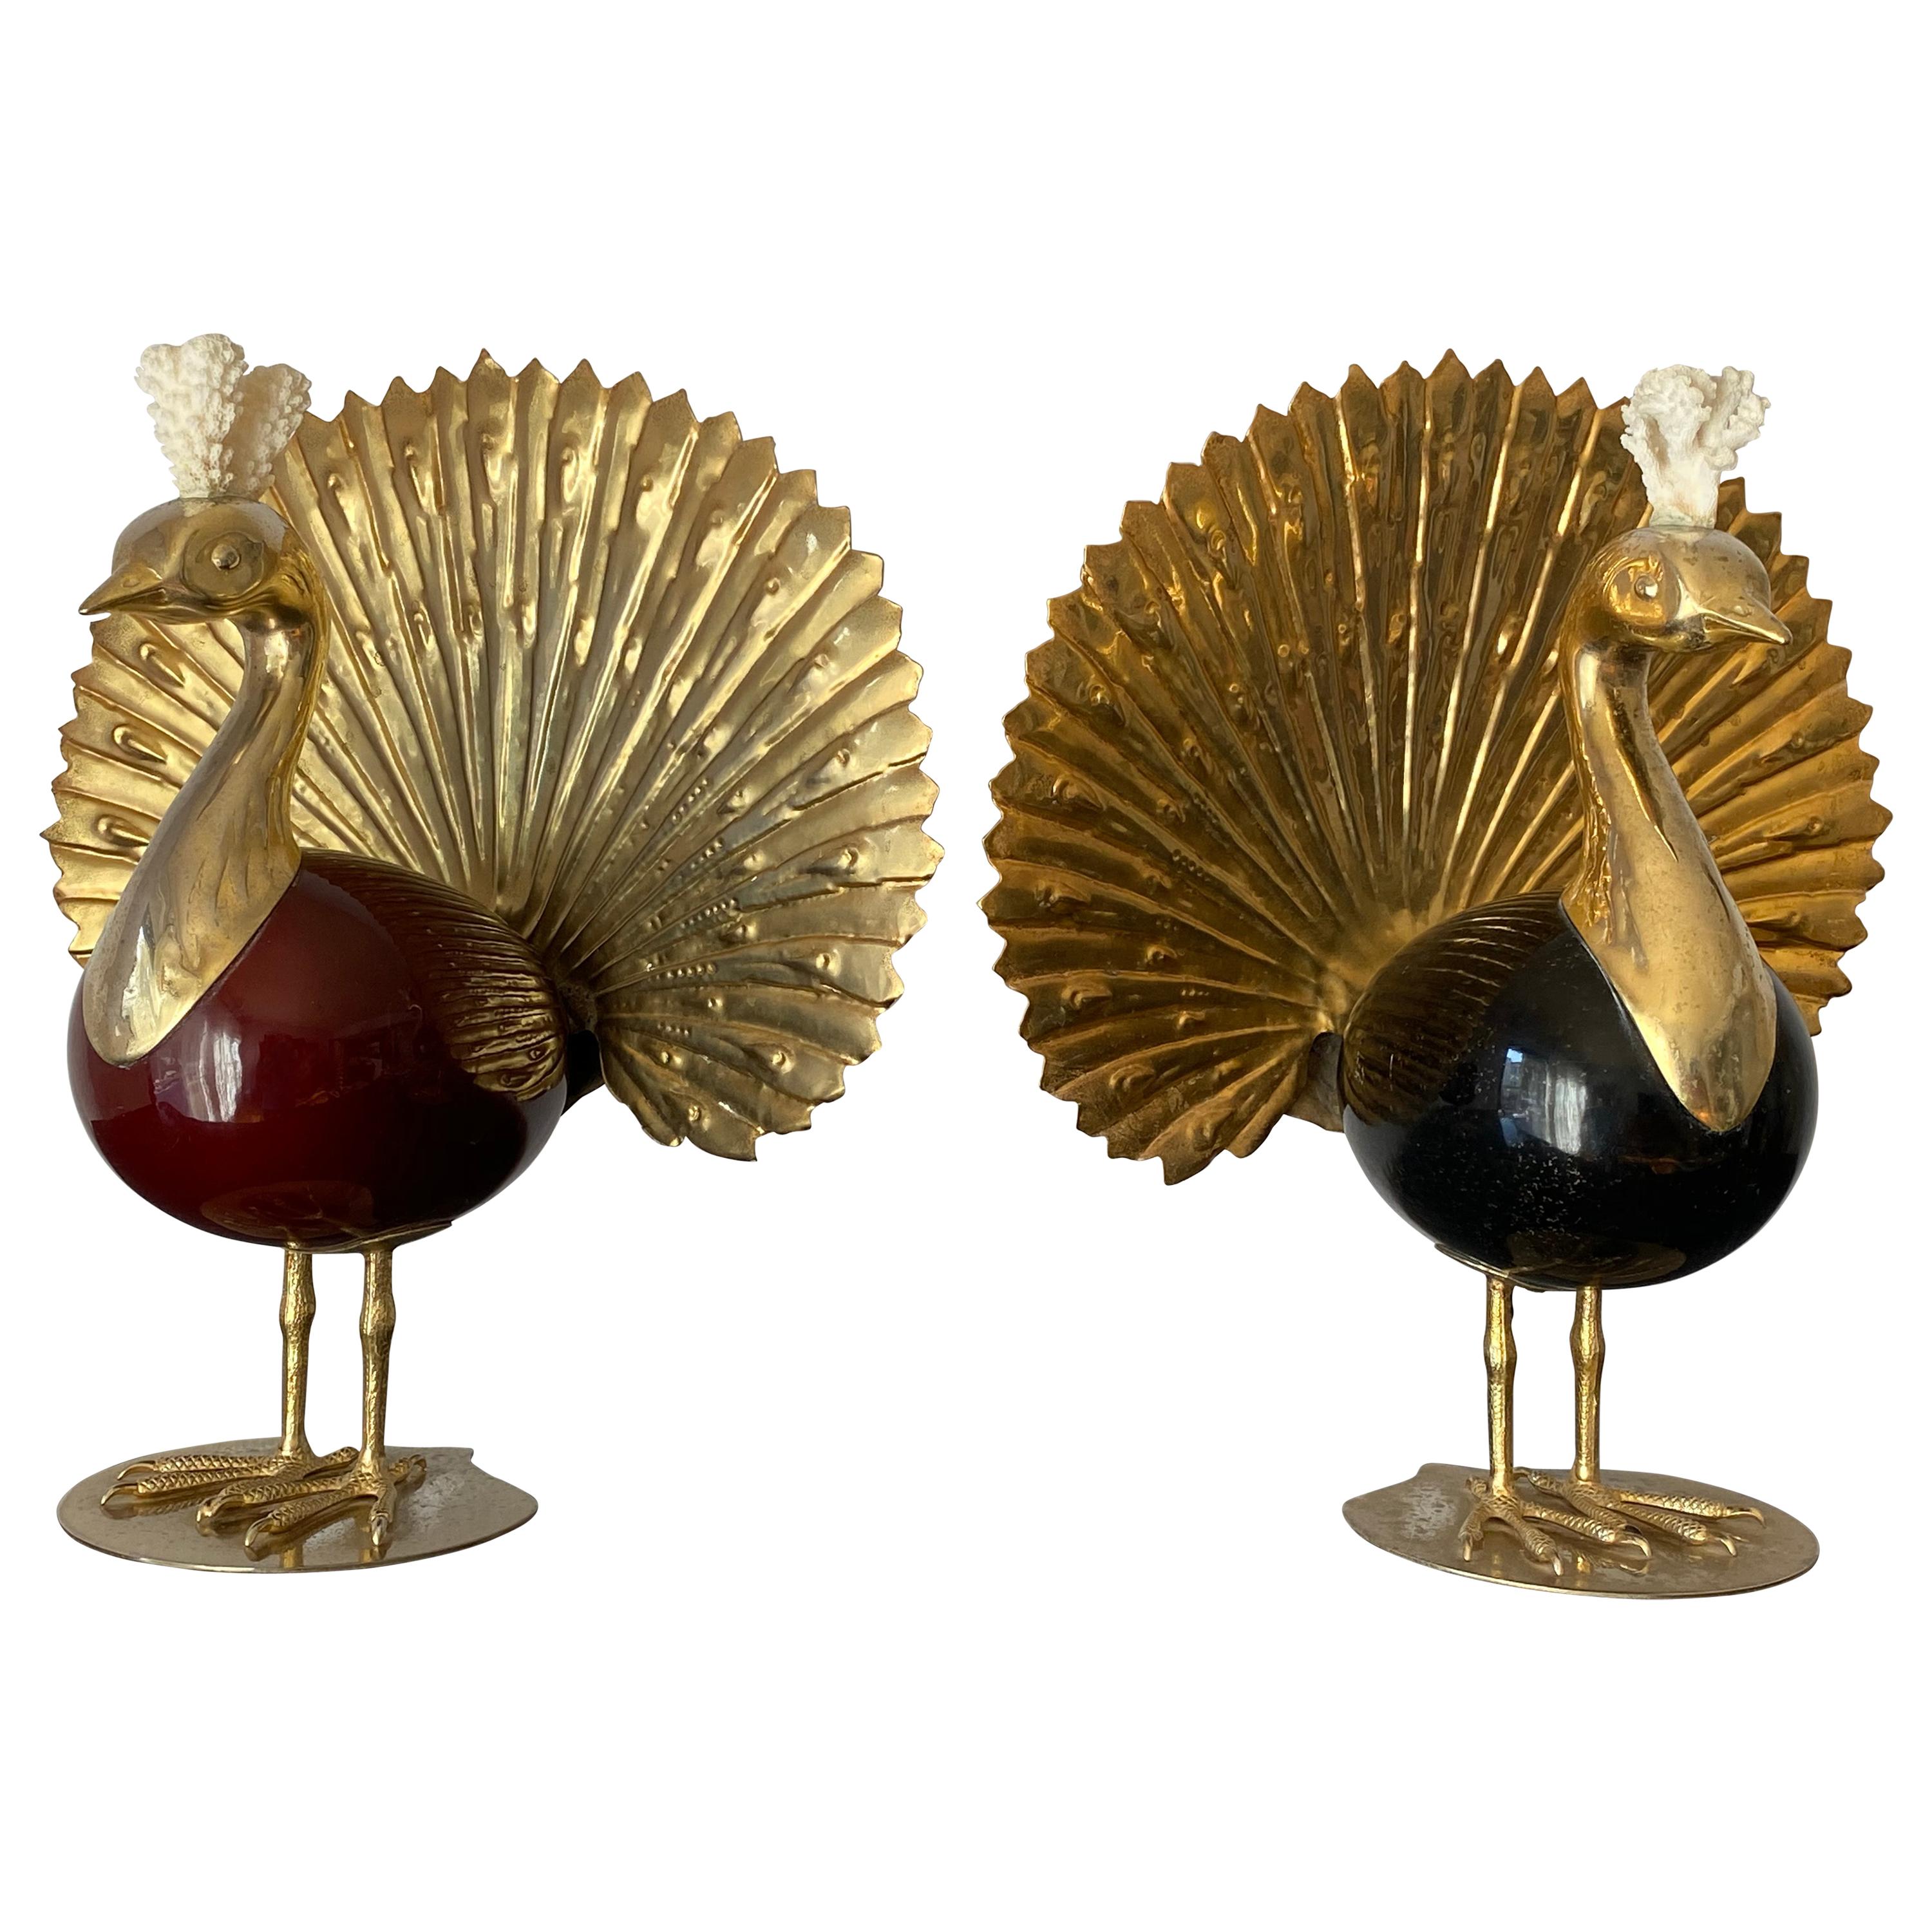 Pair of Antonio Pavia Brass and Coral Peacock Bookends Sculptures